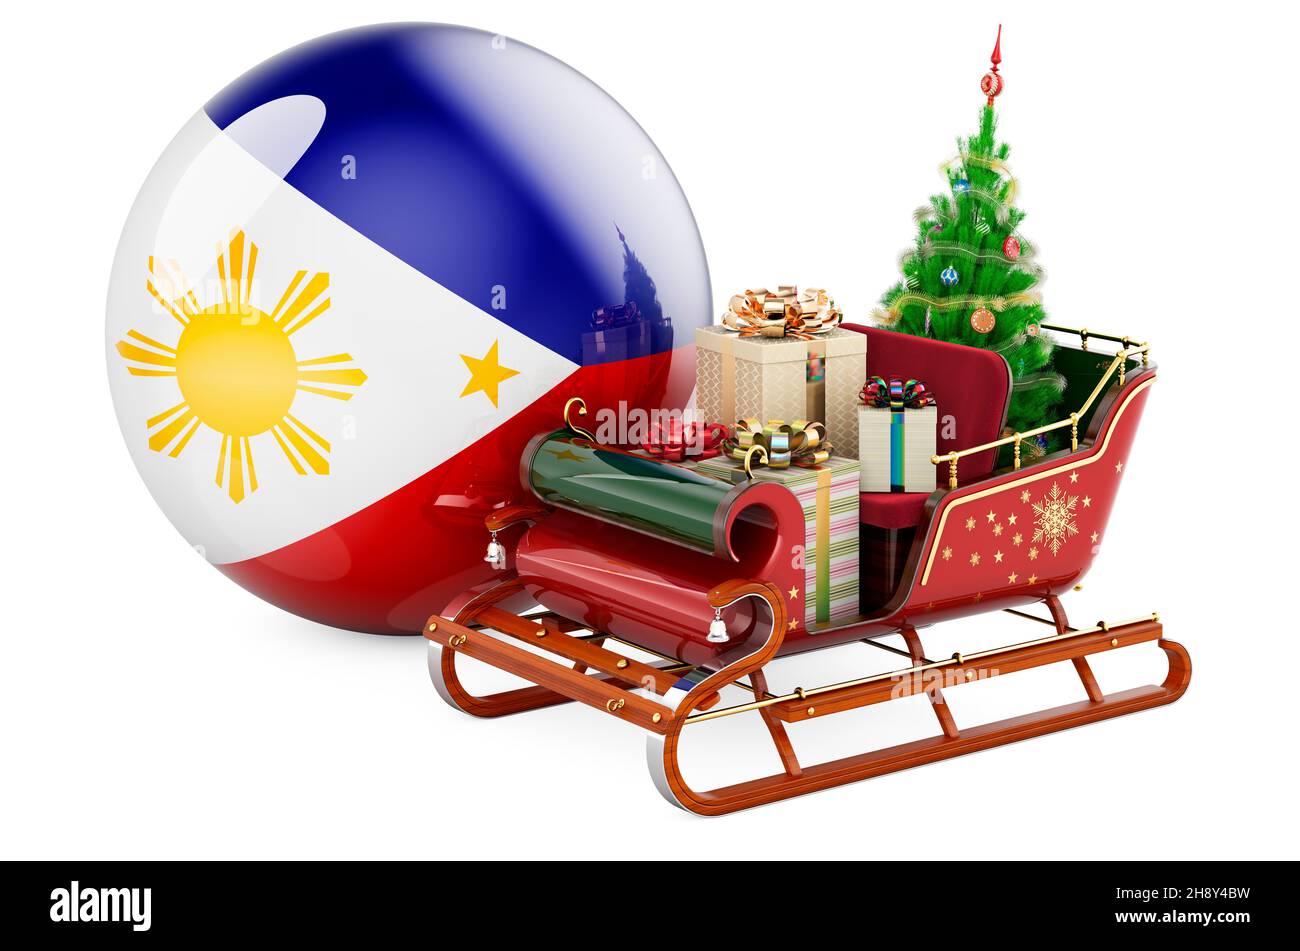 Christmas in Philippines, concept. Christmas Santa sleigh full of gifts